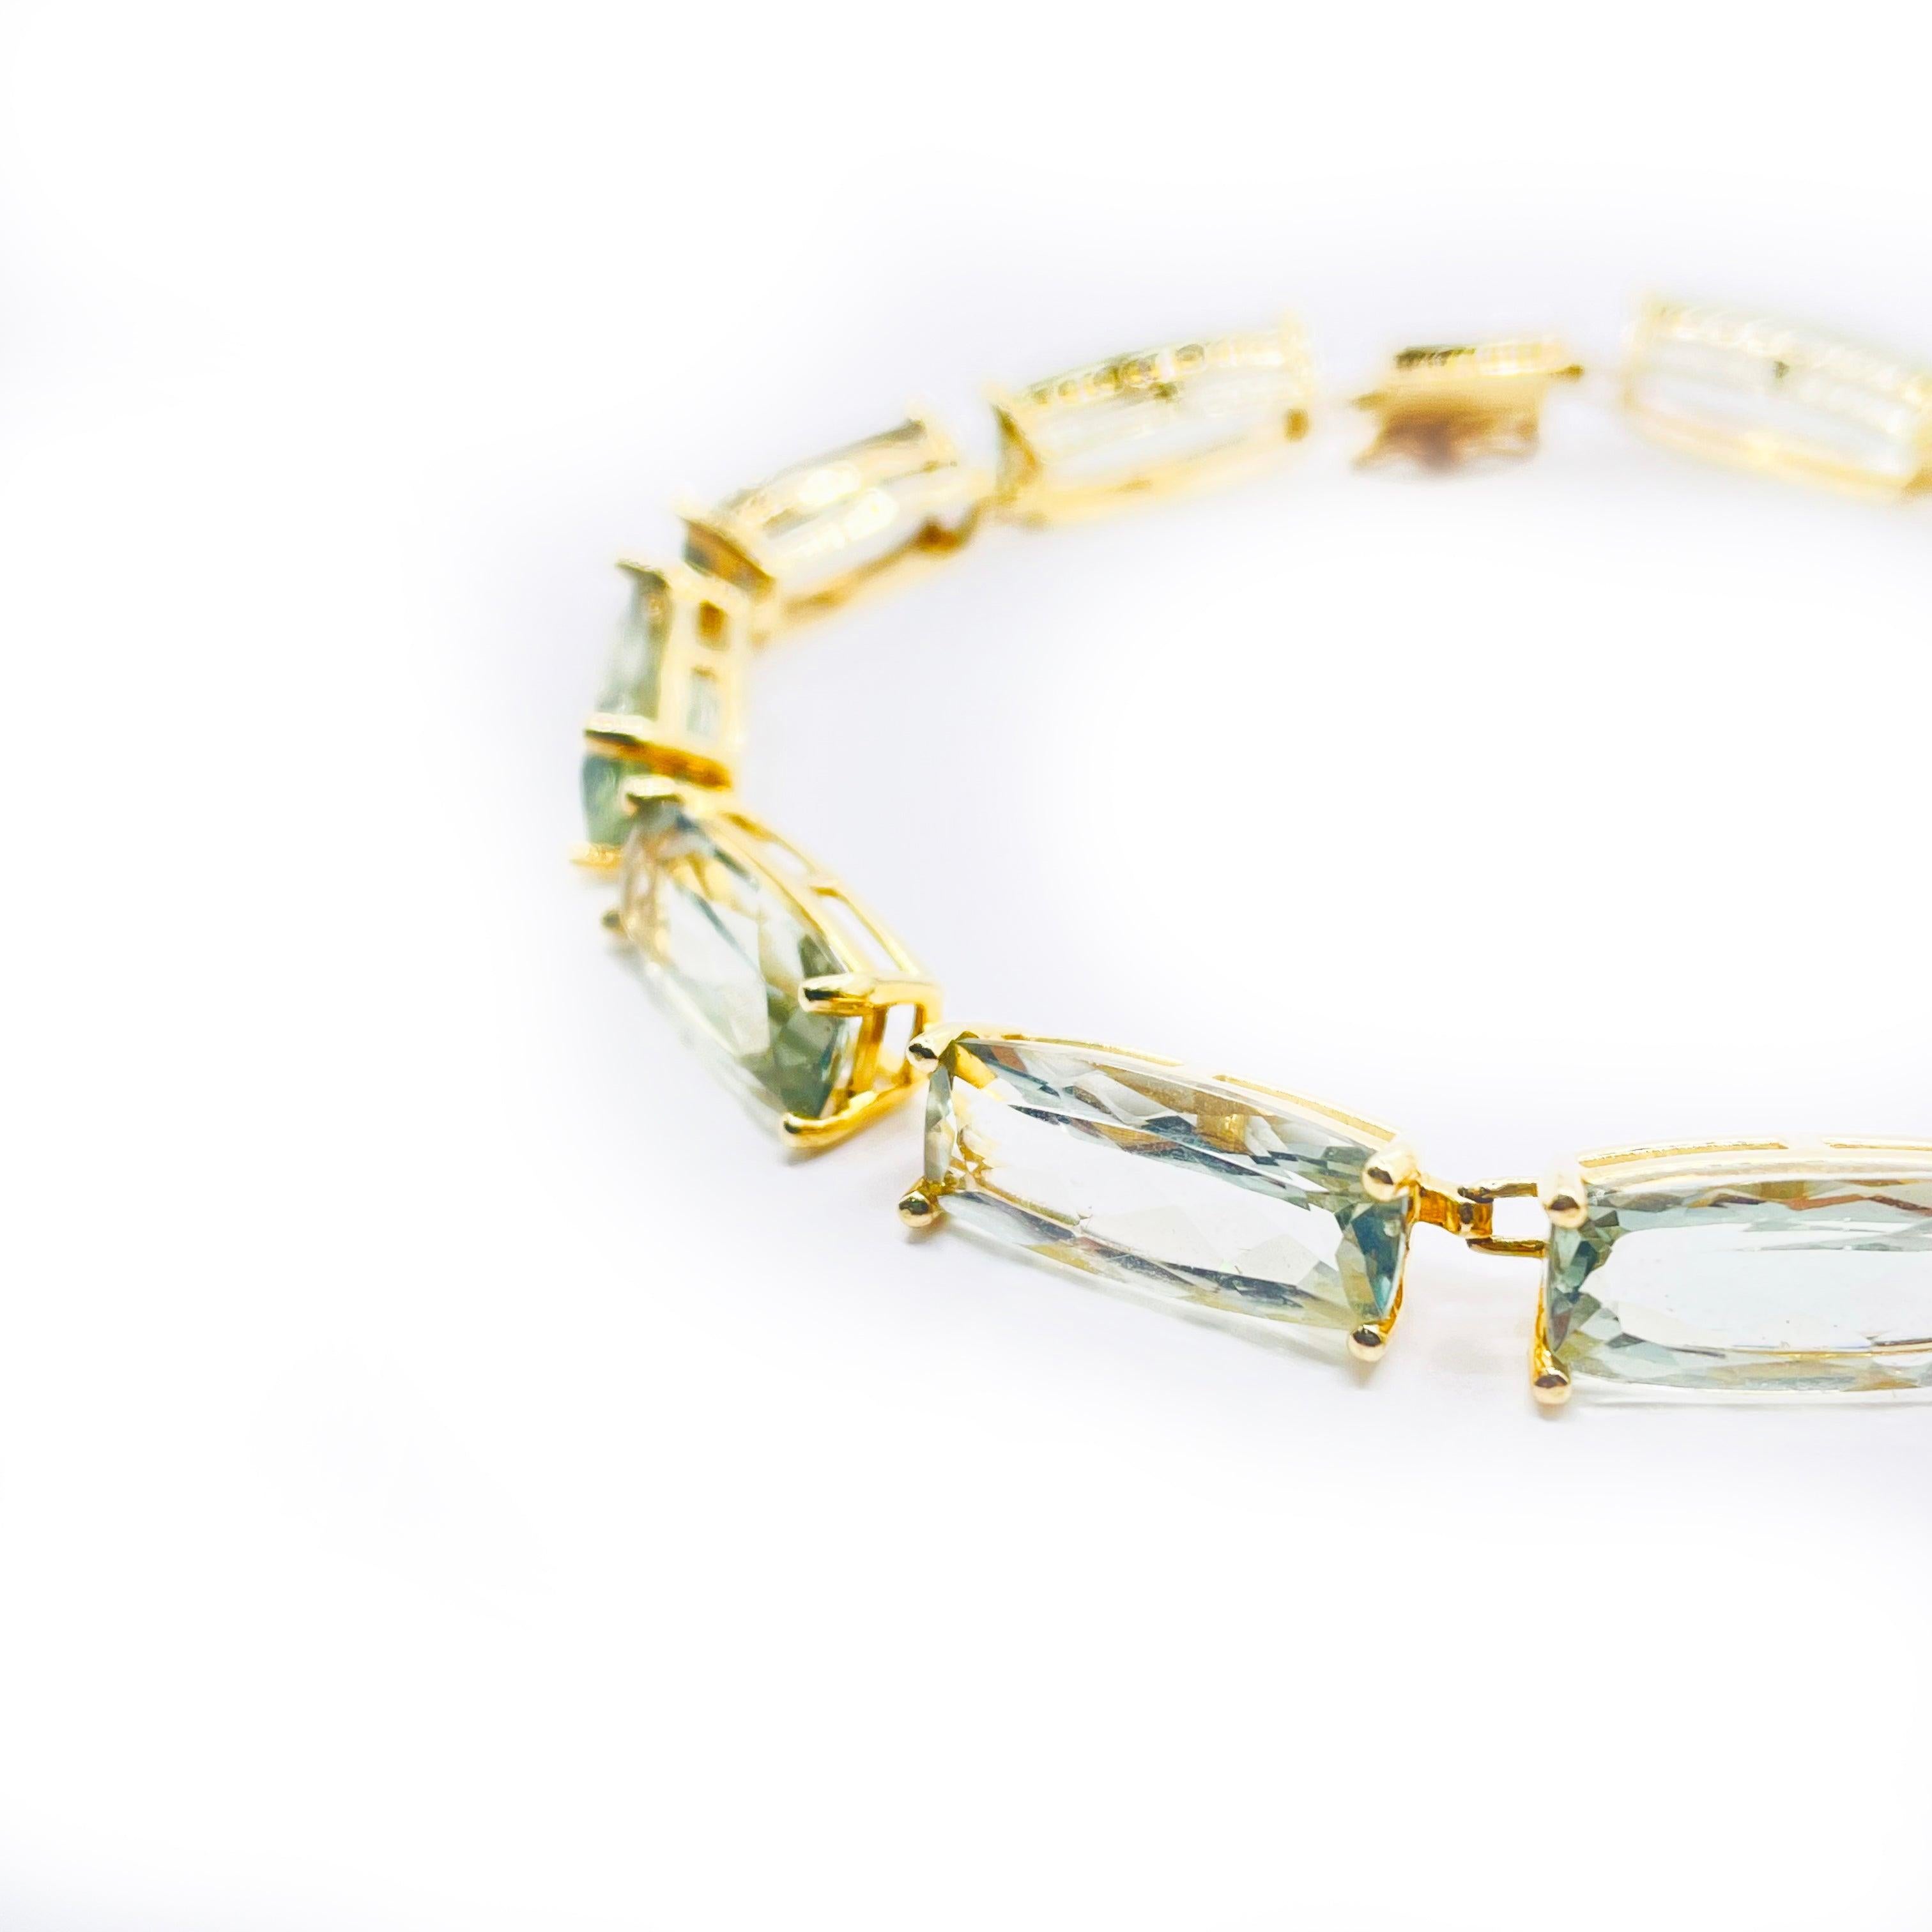 Adorn your wrist with the exquisite beauty of this
14k yellow gold bracelet weighing 11.5G featuring a
greenish topaz adds a unique touch to this piece, 
making it stand out from traditional gold bracelets.
